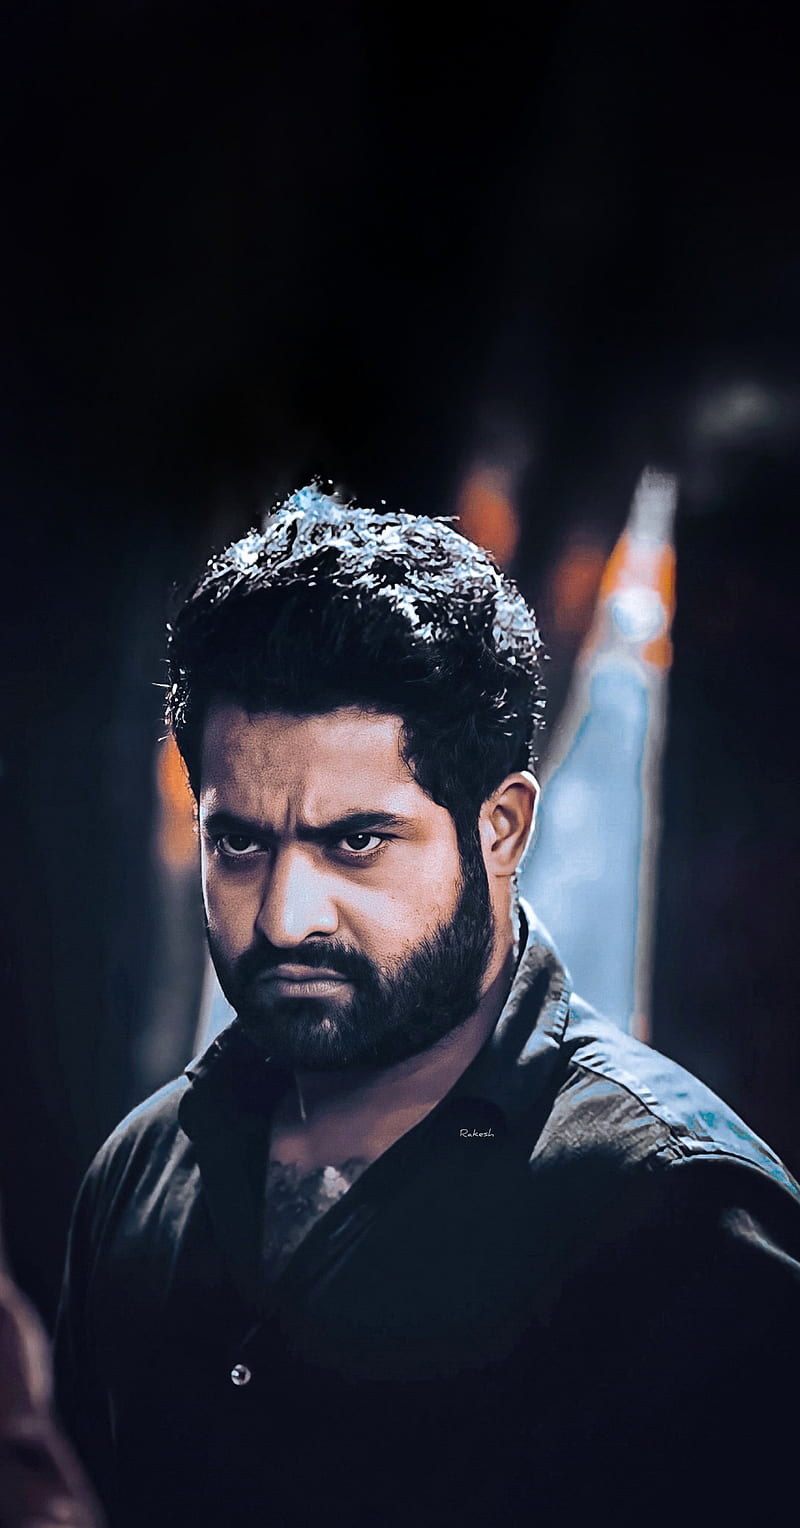 “Stunning Collection of Full 4K NTR Images – Over 999+ Images to Explore”